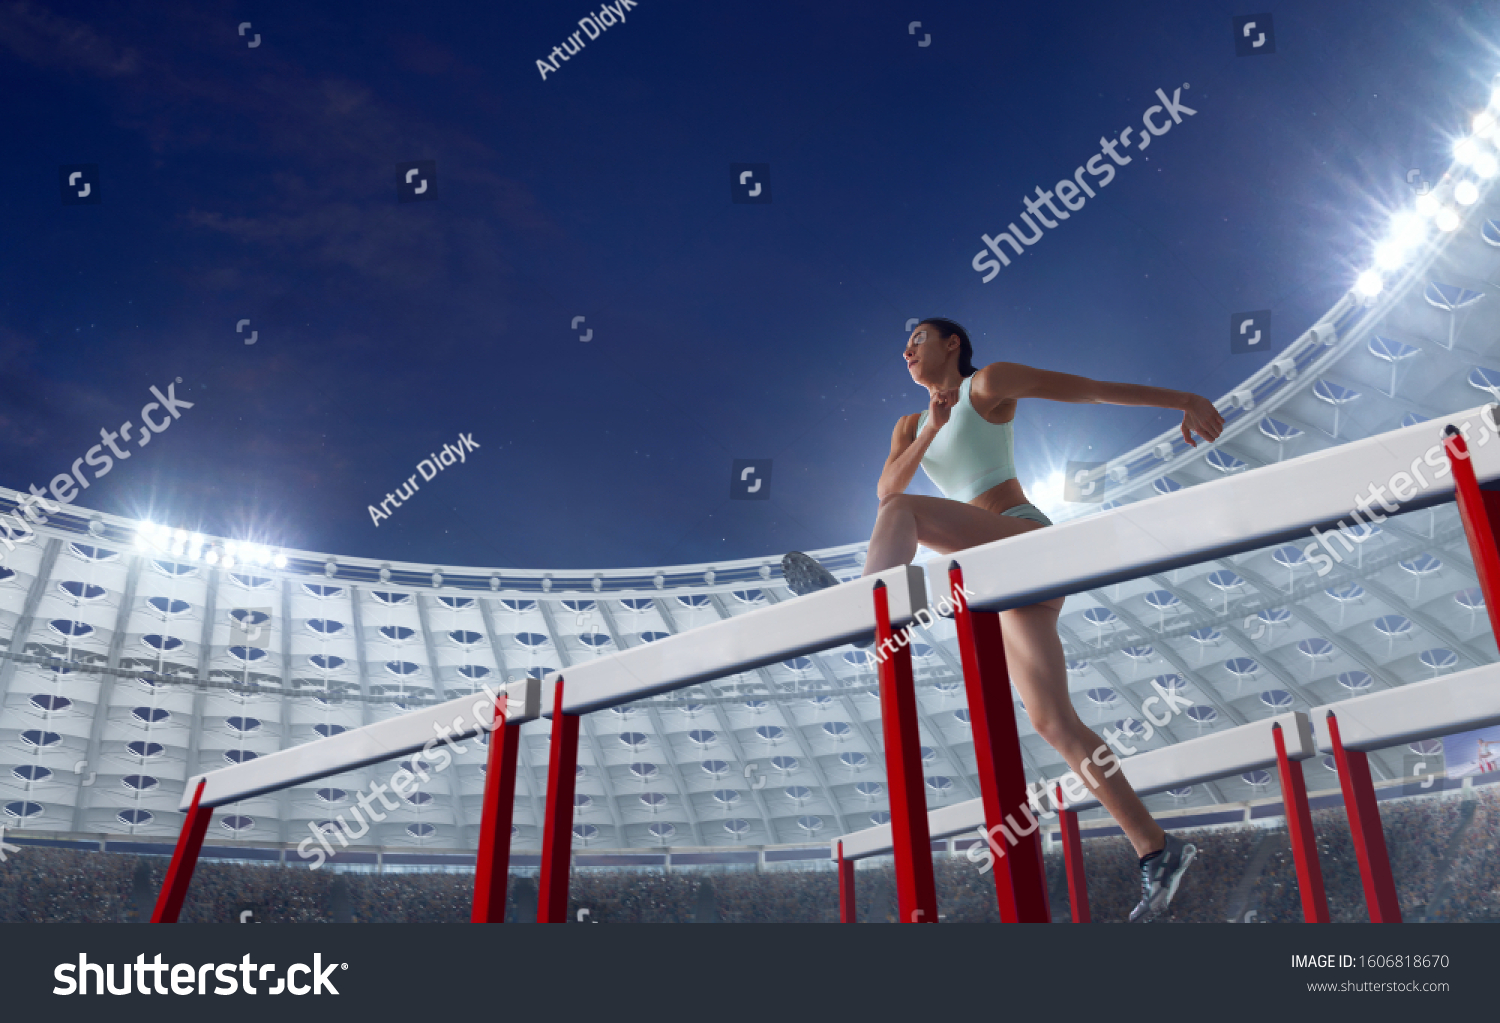 Athlete woman athlete jumps over the barrier at the running track in professional athletics stadium. #1606818670